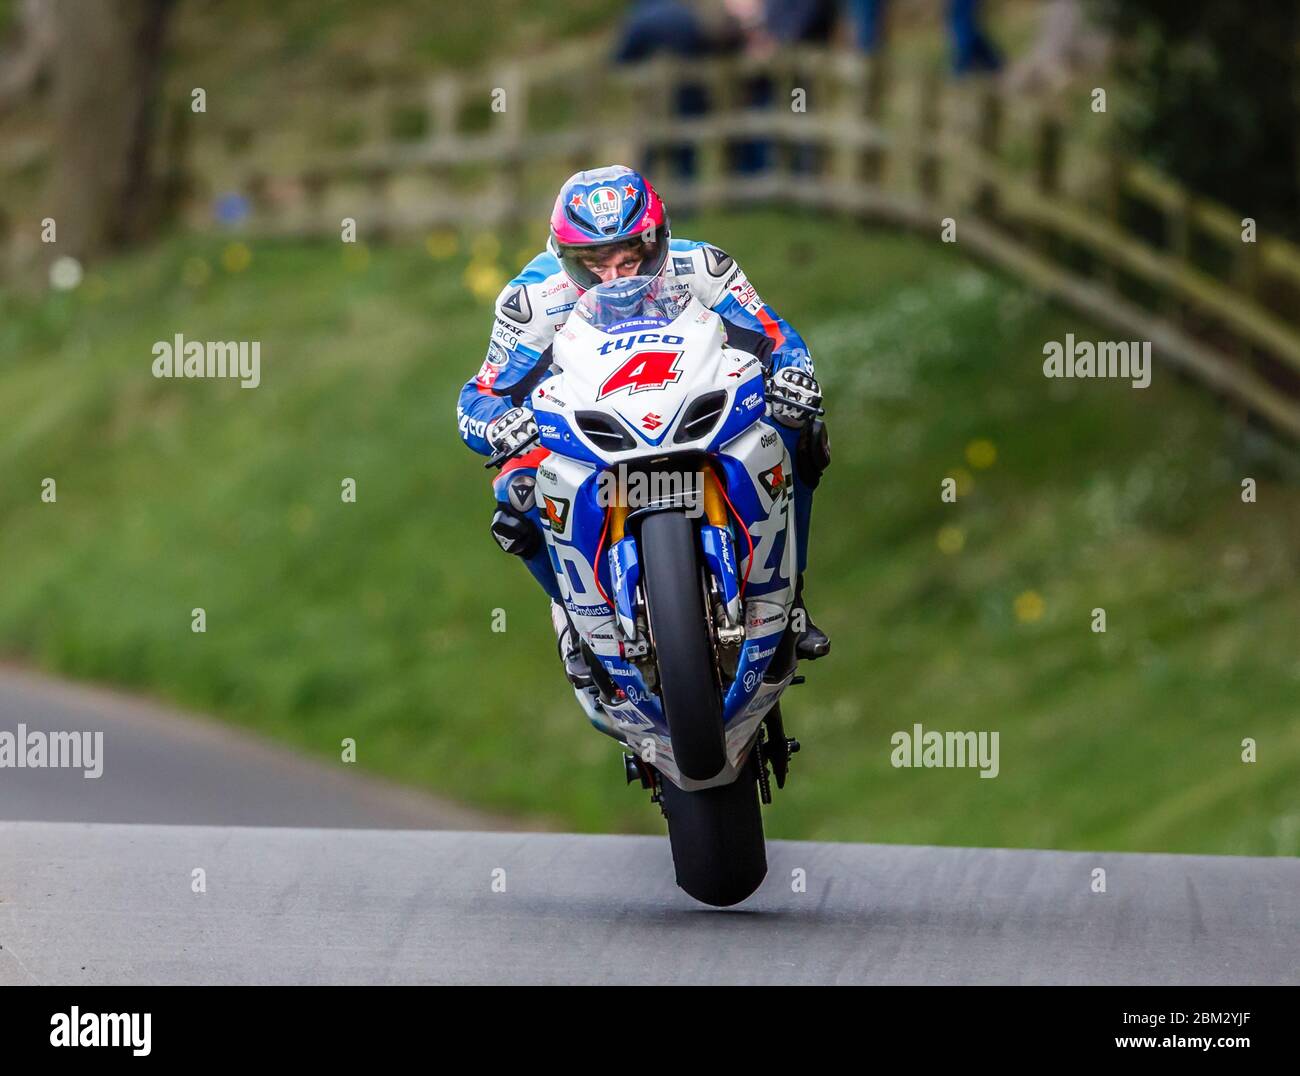 Guy Martin skimming the ground as he crests Jeffries Jump at Olivers Mount motorcycle road racing circuit, Scarborough, North Yorkshire, England Stock Photo